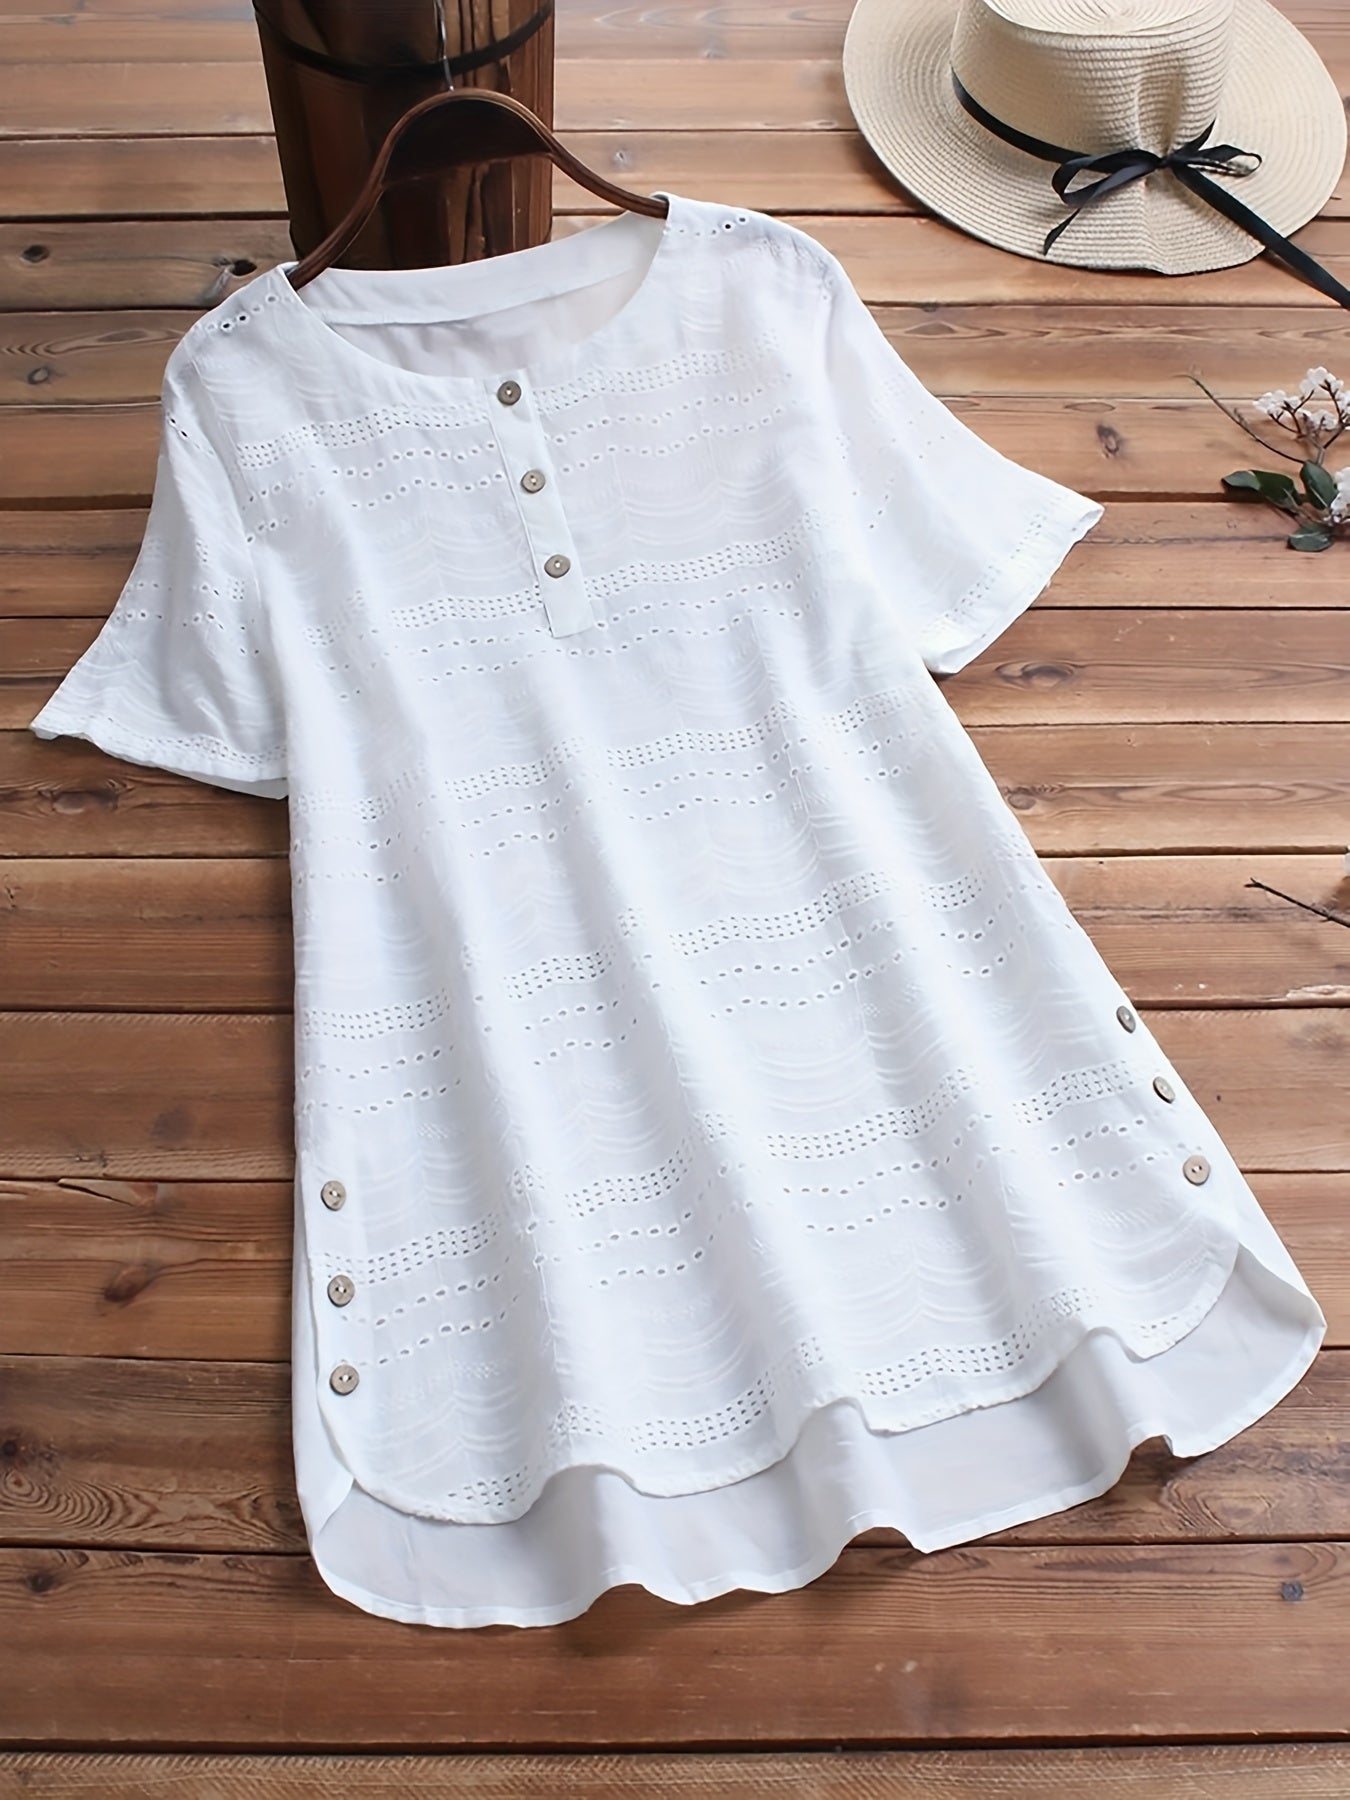 「lovevop」Eyelet Embroidered Button Decor Blouse, Casual Short Sleeve Blouse For Spring & Summer, Women's Clothing